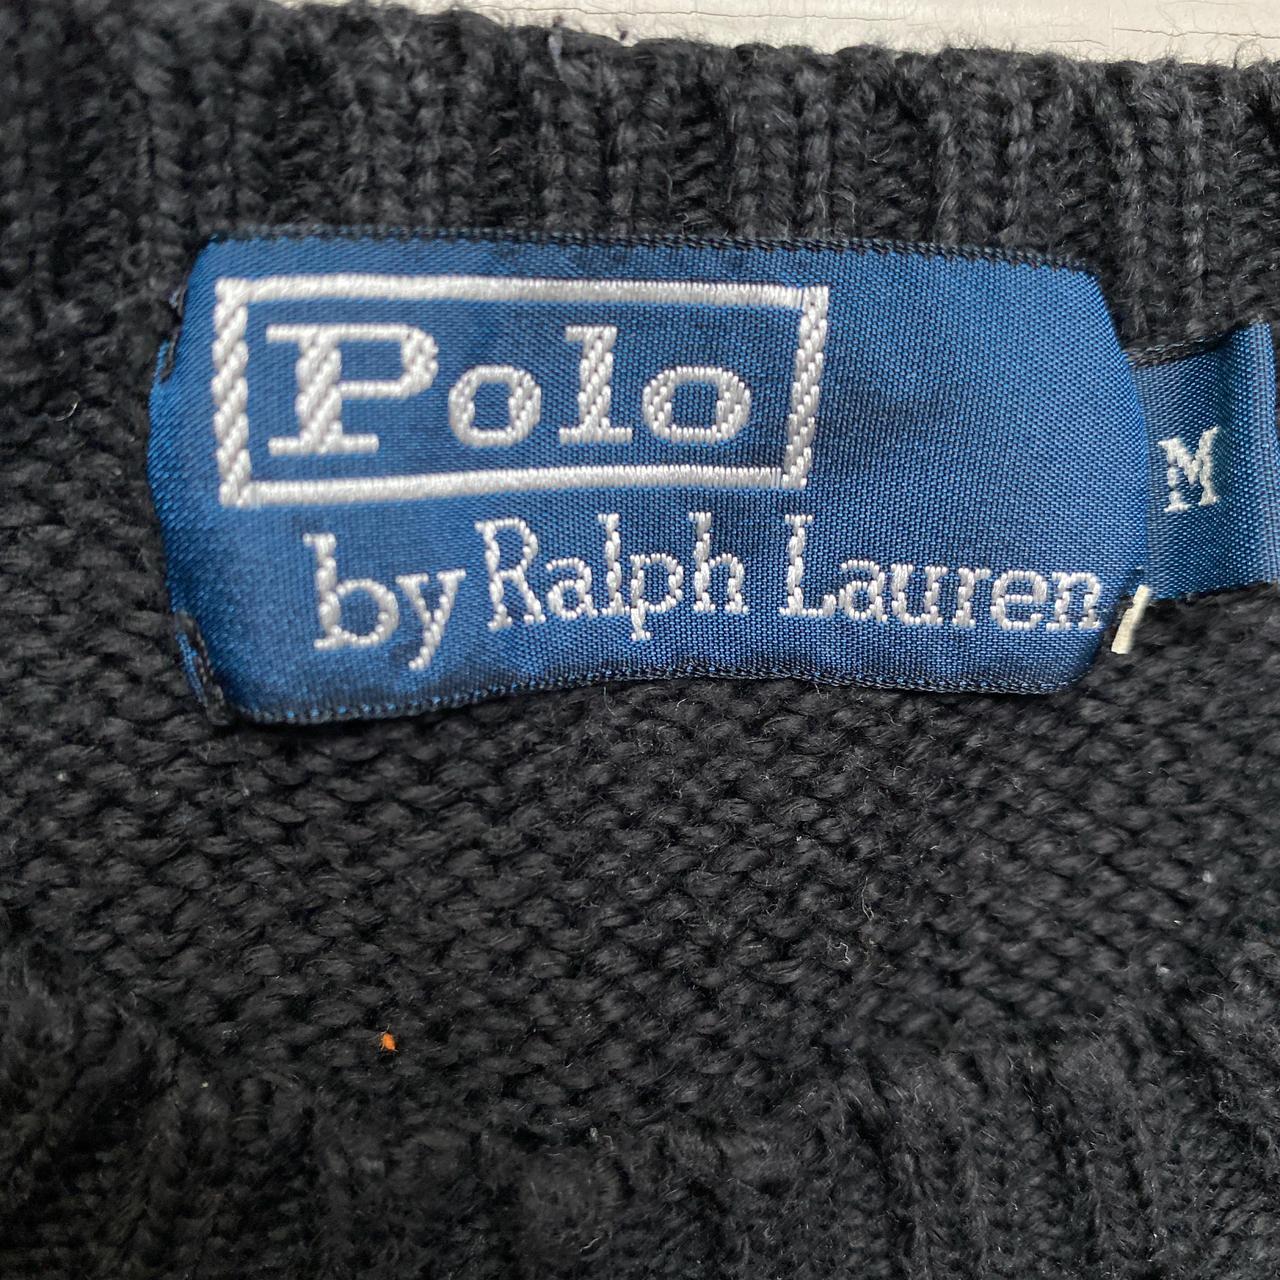 Polo Ralph Lauren Black and Red Knit Jumper